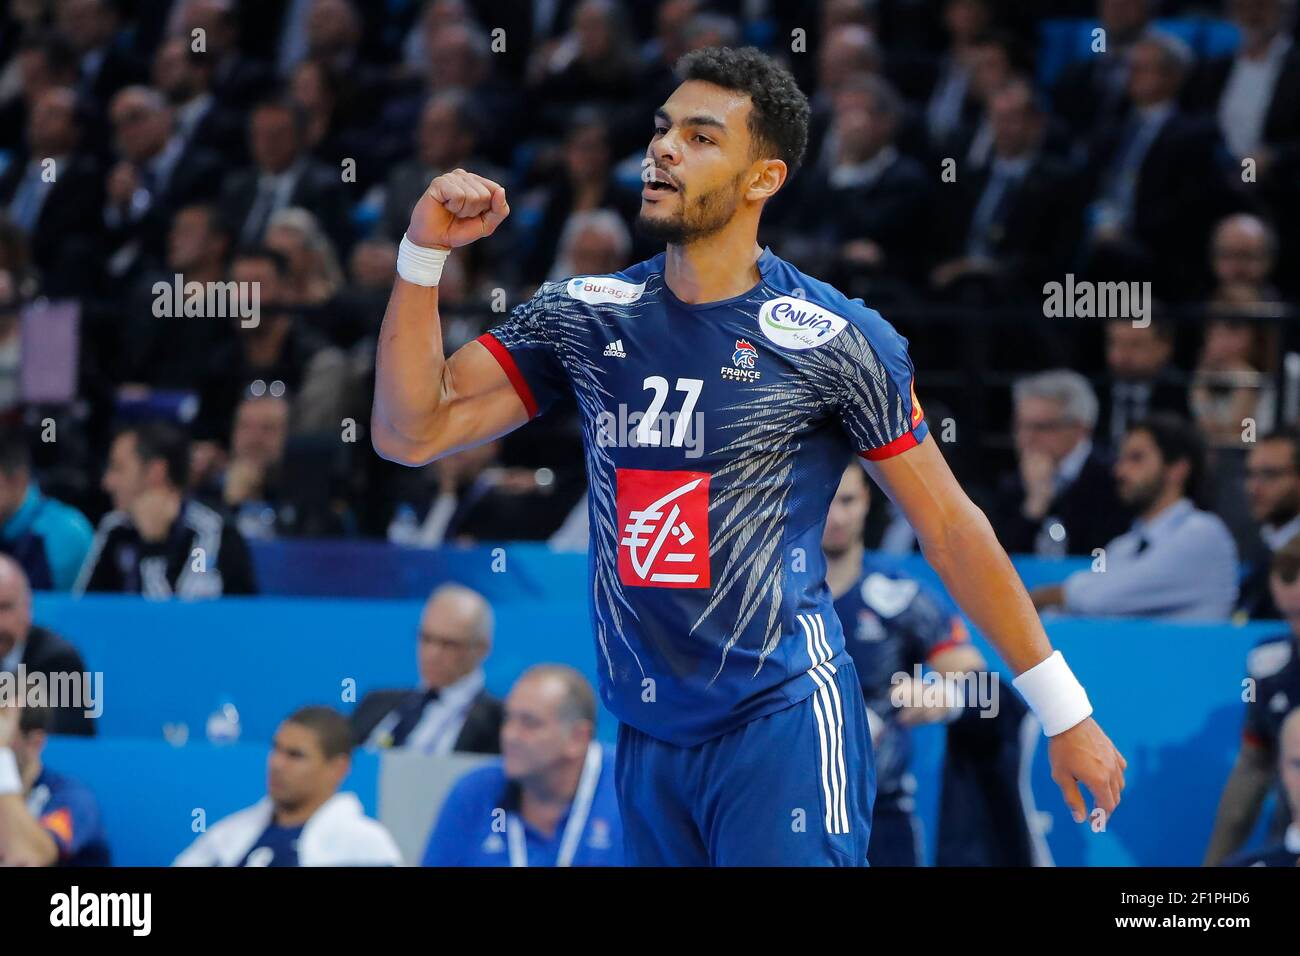 Adrien DIPANDA (FRA) during the Men's Handball World Championship France 2017 match Group A, between France and Brazil, on January 11, 2017 at Accorhotels Arena in Paris, France - Photo Stephane Allaman / DPPI Stock Photo